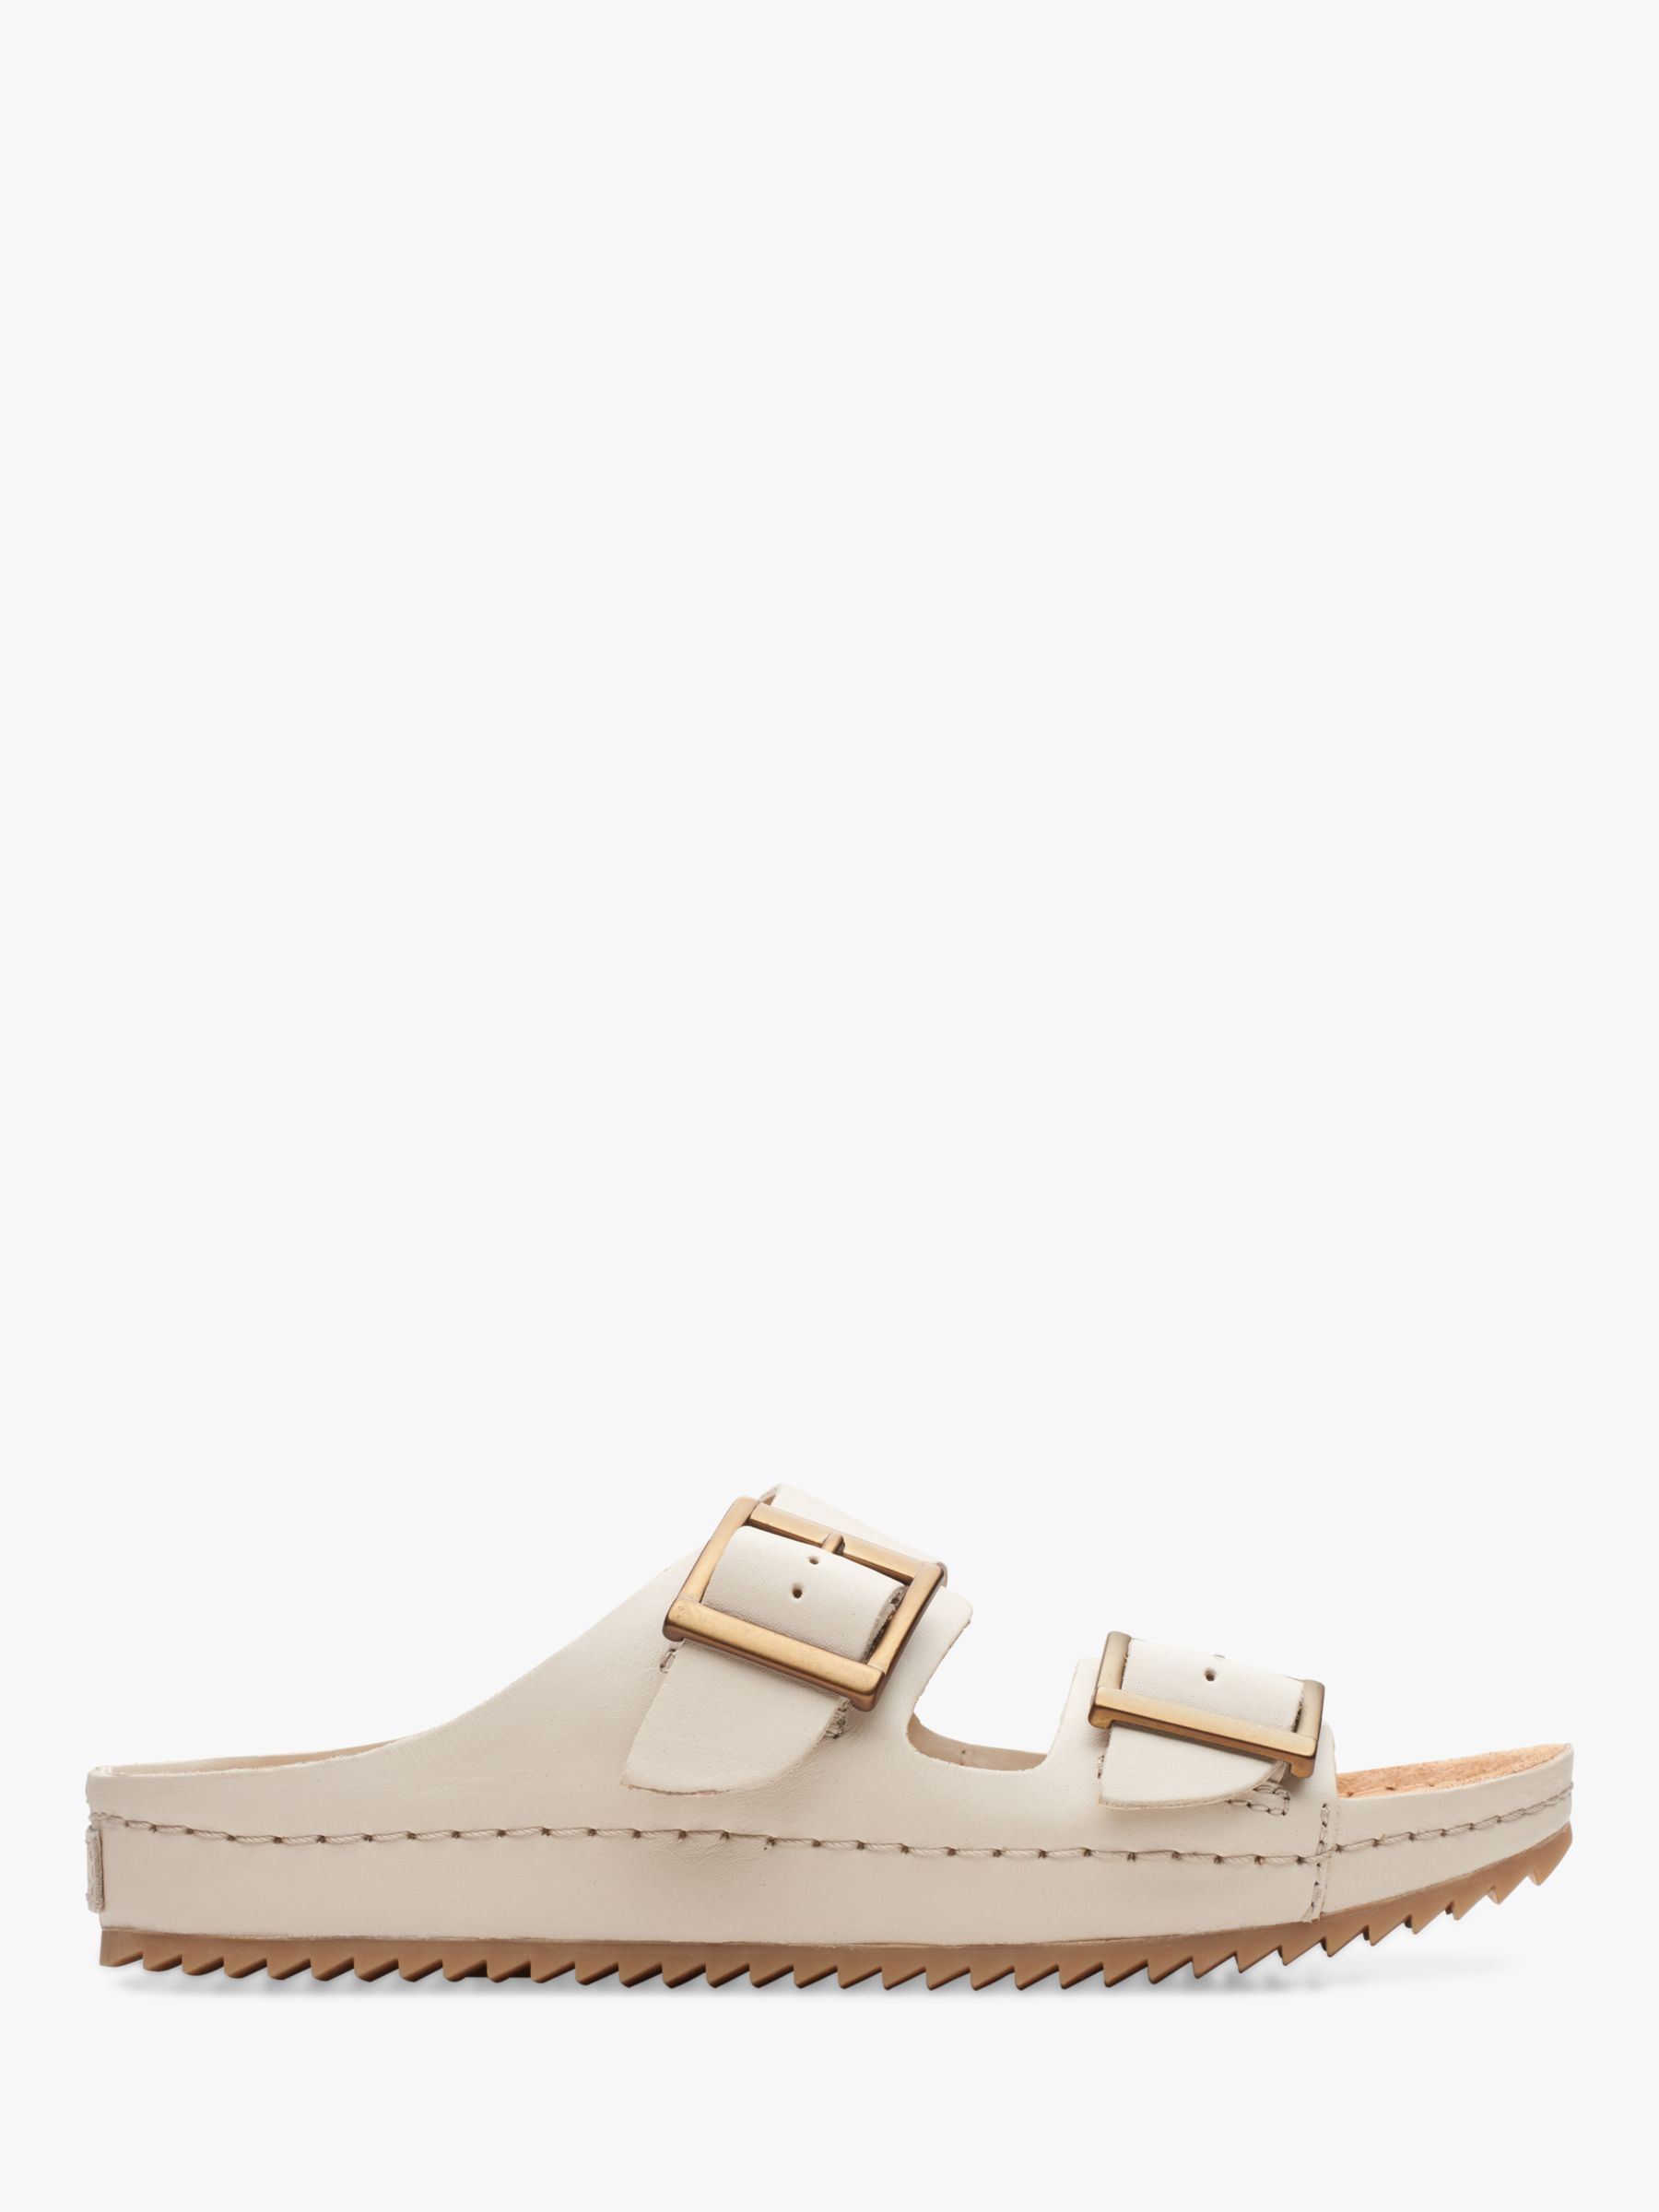 Clarks Brookleigh Sun Leather Footbed Sandals, Ivory at John Lewis ...